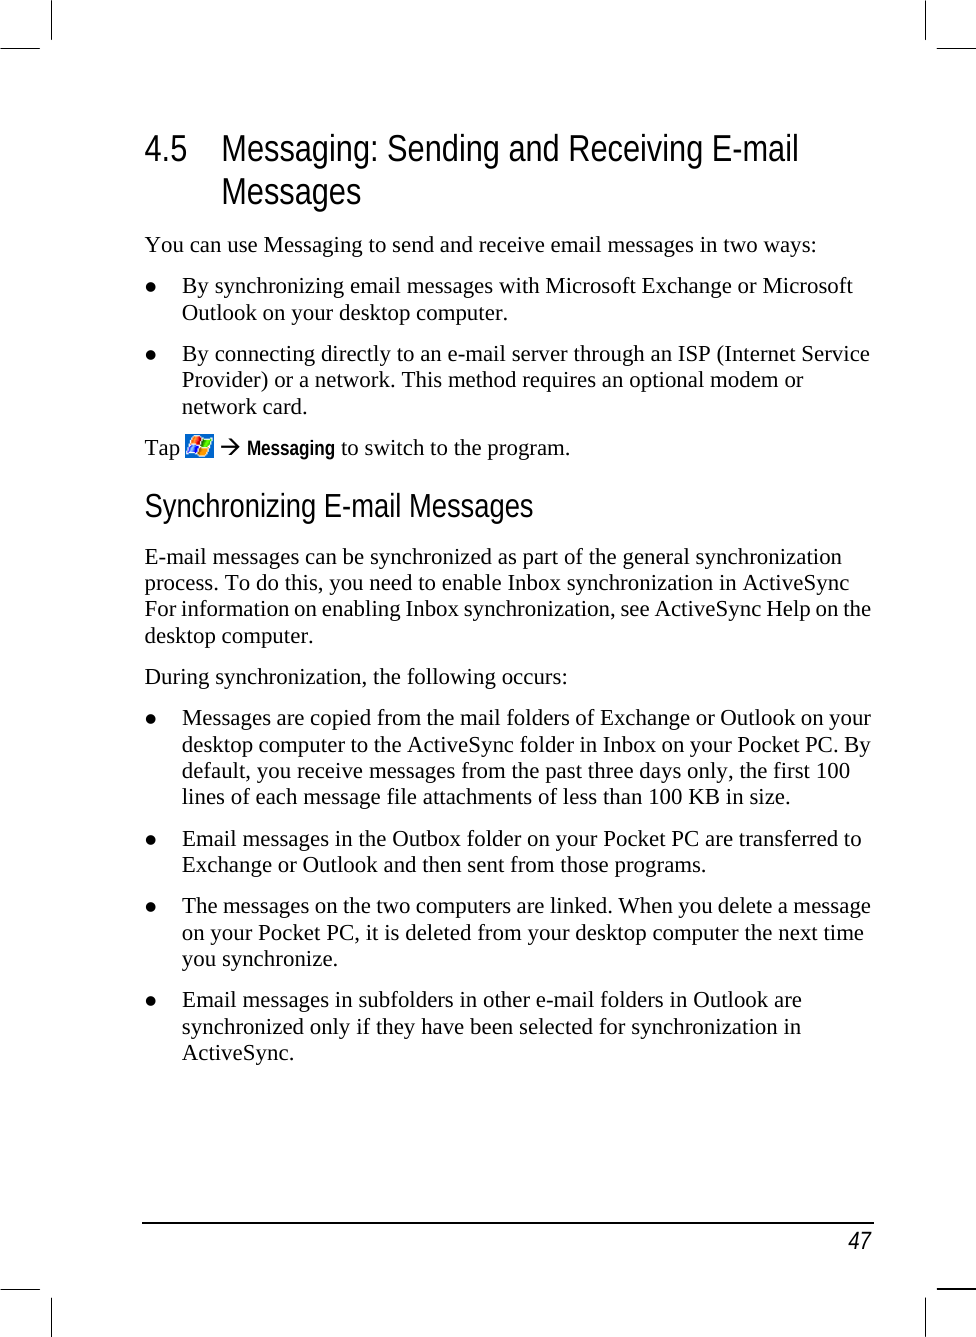   47 4.5  Messaging: Sending and Receiving E-mail Messages You can use Messaging to send and receive email messages in two ways:   By synchronizing email messages with Microsoft Exchange or Microsoft Outlook on your desktop computer.   By connecting directly to an e-mail server through an ISP (Internet Service Provider) or a network. This method requires an optional modem or network card. Tap    Messaging to switch to the program. Synchronizing E-mail Messages E-mail messages can be synchronized as part of the general synchronization process. To do this, you need to enable Inbox synchronization in ActiveSync For information on enabling Inbox synchronization, see ActiveSync Help on the desktop computer.  During synchronization, the following occurs:   Messages are copied from the mail folders of Exchange or Outlook on your desktop computer to the ActiveSync folder in Inbox on your Pocket PC. By default, you receive messages from the past three days only, the first 100 lines of each message file attachments of less than 100 KB in size.   Email messages in the Outbox folder on your Pocket PC are transferred to Exchange or Outlook and then sent from those programs.   The messages on the two computers are linked. When you delete a message on your Pocket PC, it is deleted from your desktop computer the next time you synchronize.   Email messages in subfolders in other e-mail folders in Outlook are synchronized only if they have been selected for synchronization in ActiveSync. 